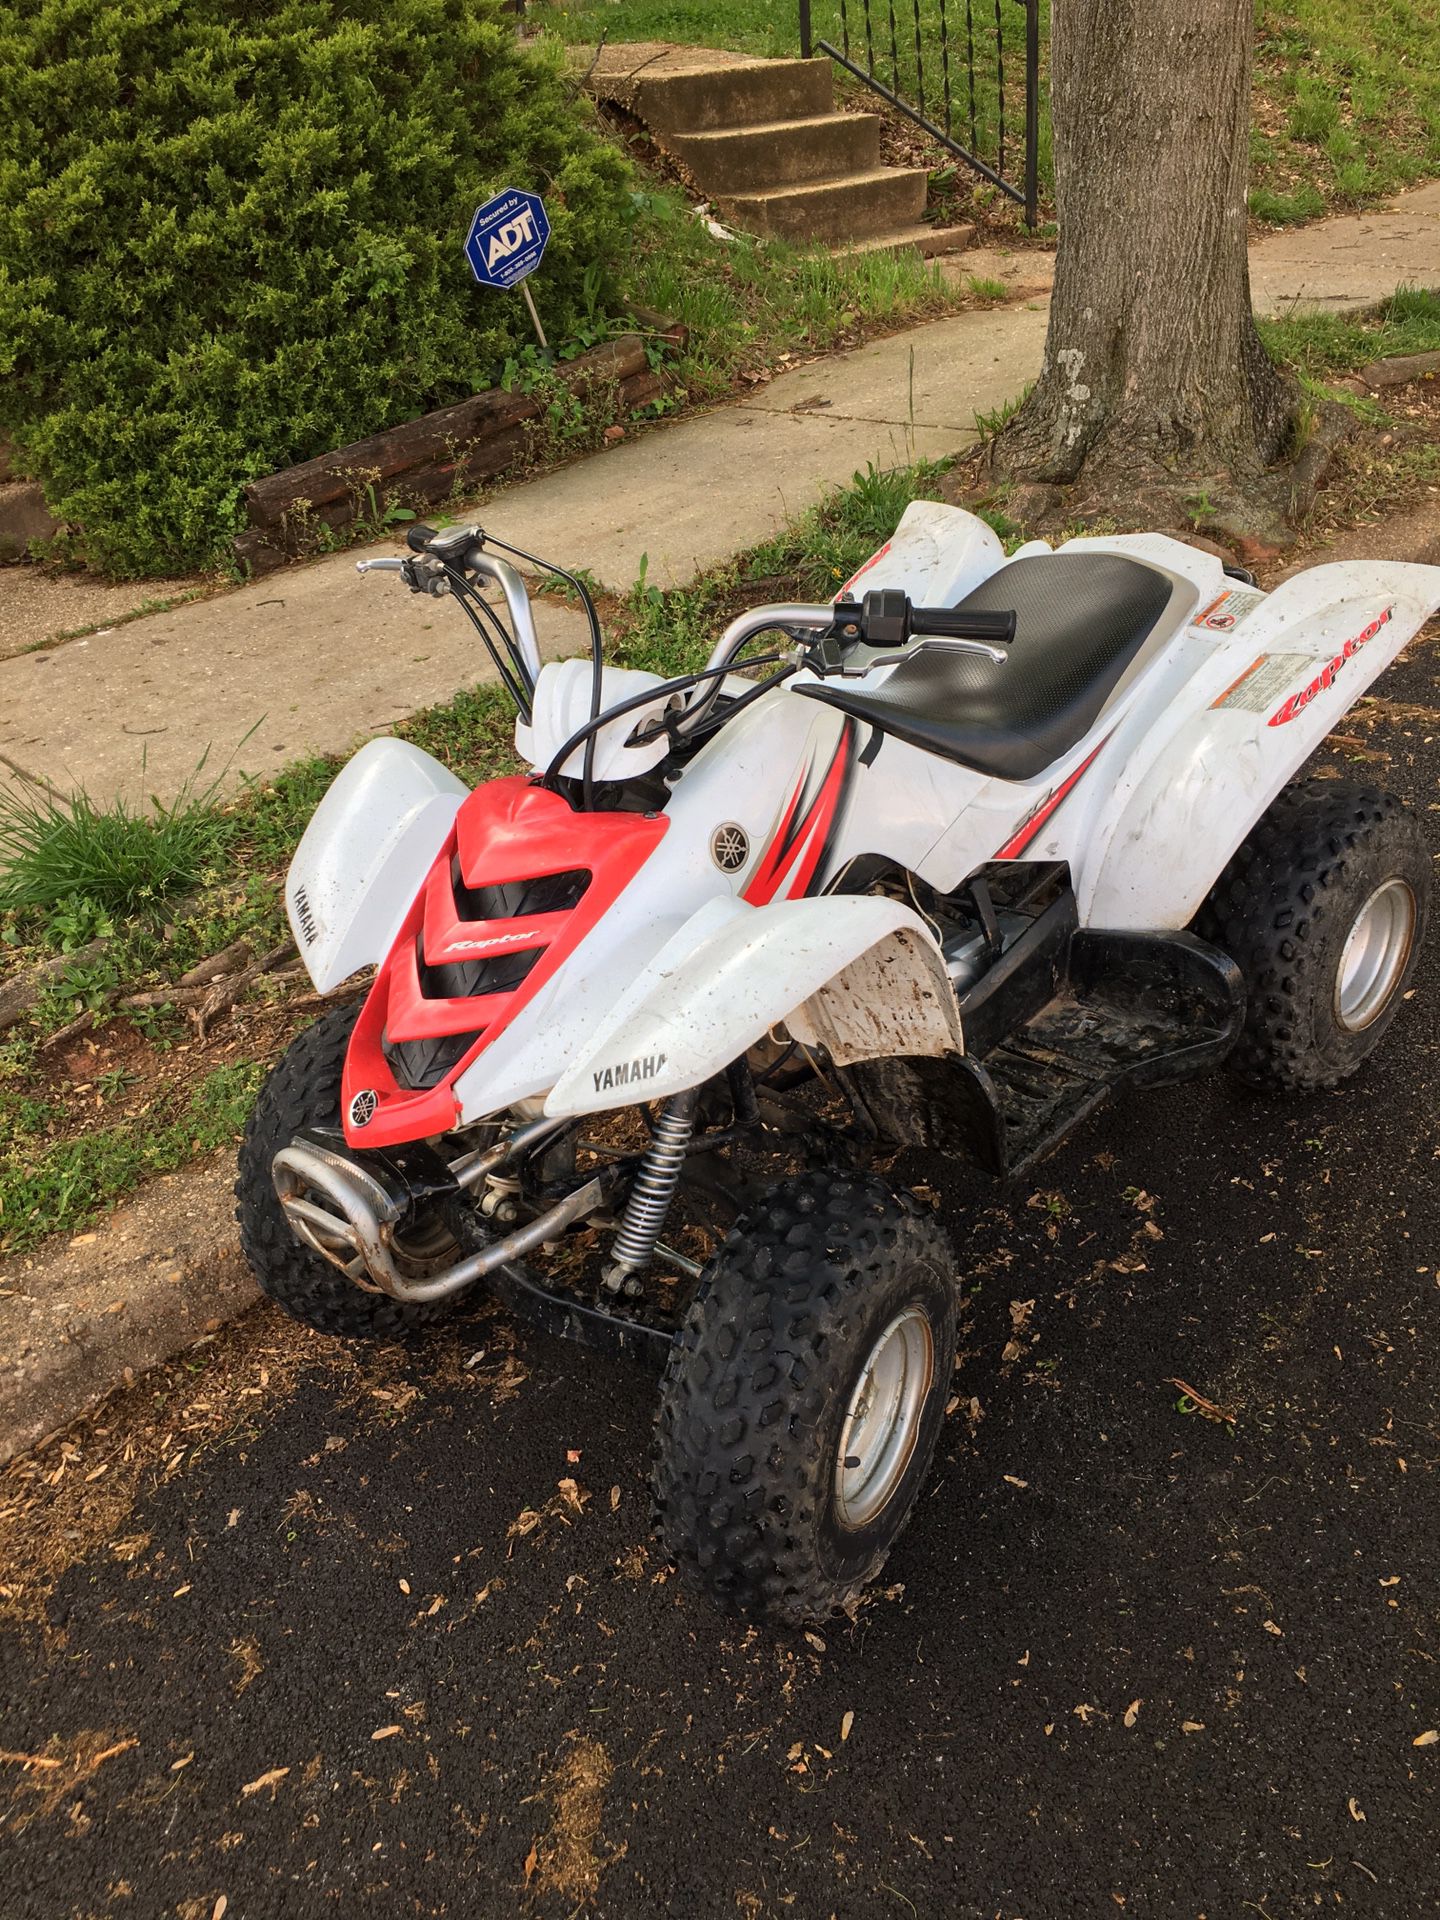 Raptor 50 nothing wrong with it .trying to trade it for my son he wants a crf50 ttr 50 or jr50 but $600 no less then $550 lowest